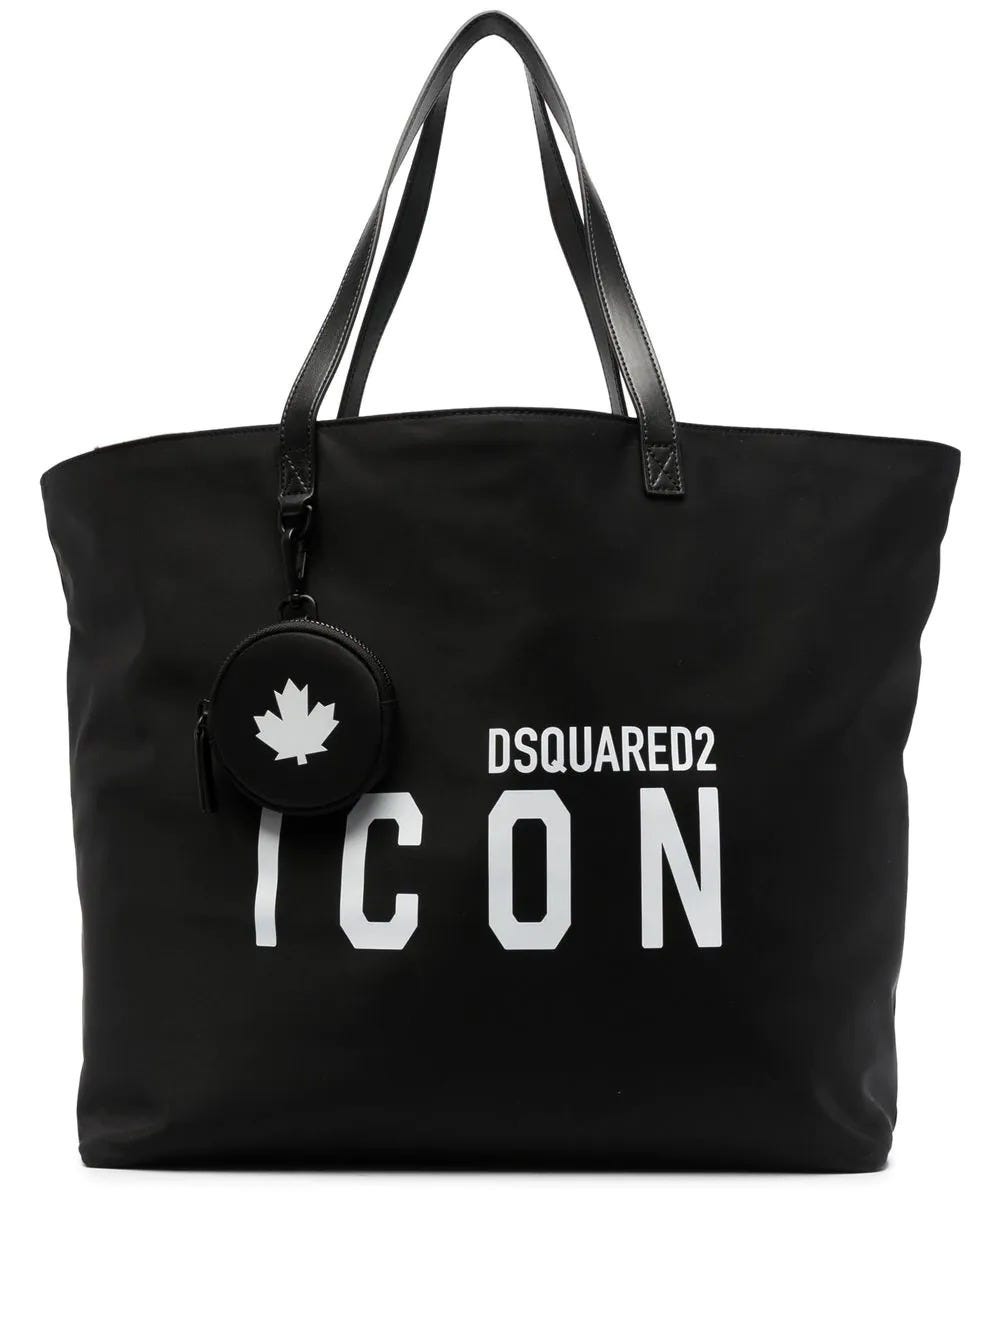 DSQUARED2 BLACK TOTE BAG WITH ICON LOGO PRINT